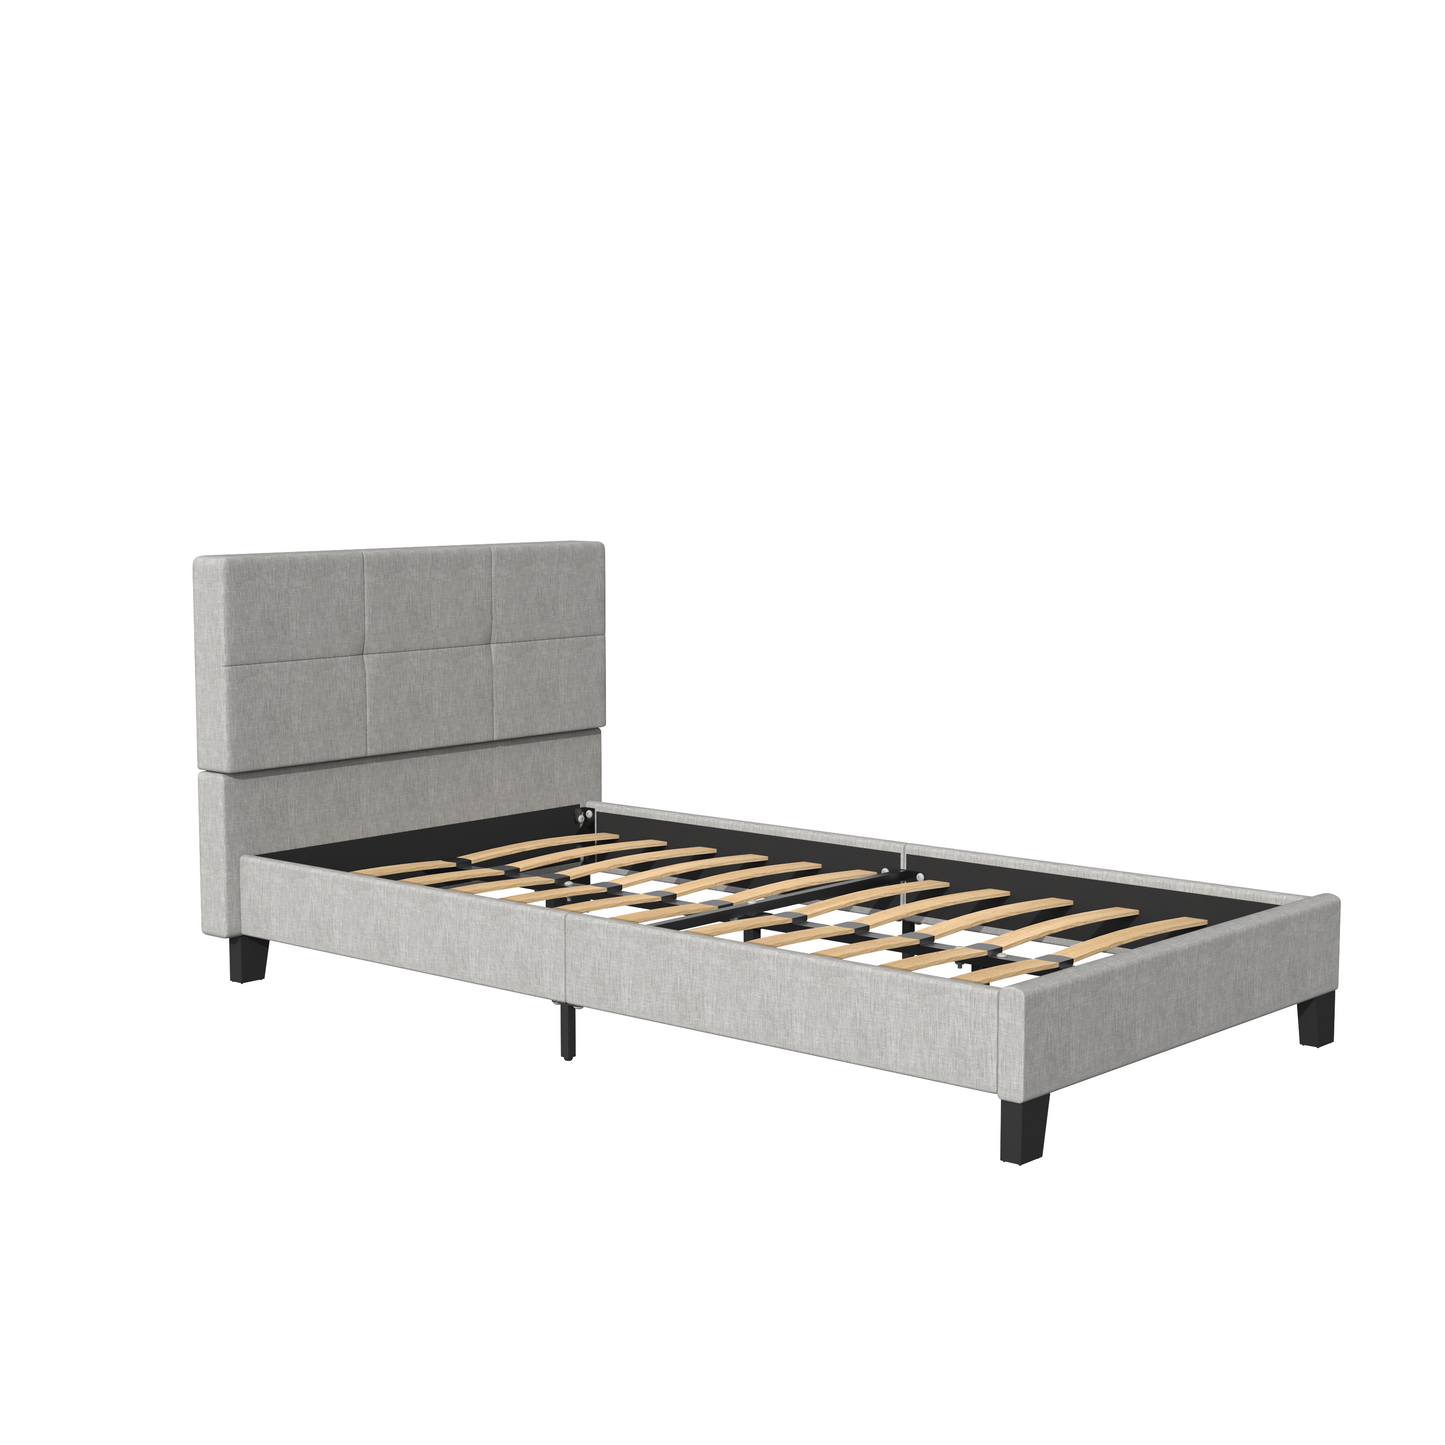 Twin Size Upholstered Bed, HSUNNS Modern Linen Fabric Twin Platform Bed with Headboard, Slatted Support Twin Bed Frame for Kids Boys Girls, 300lbs Weight Capacity, Gray